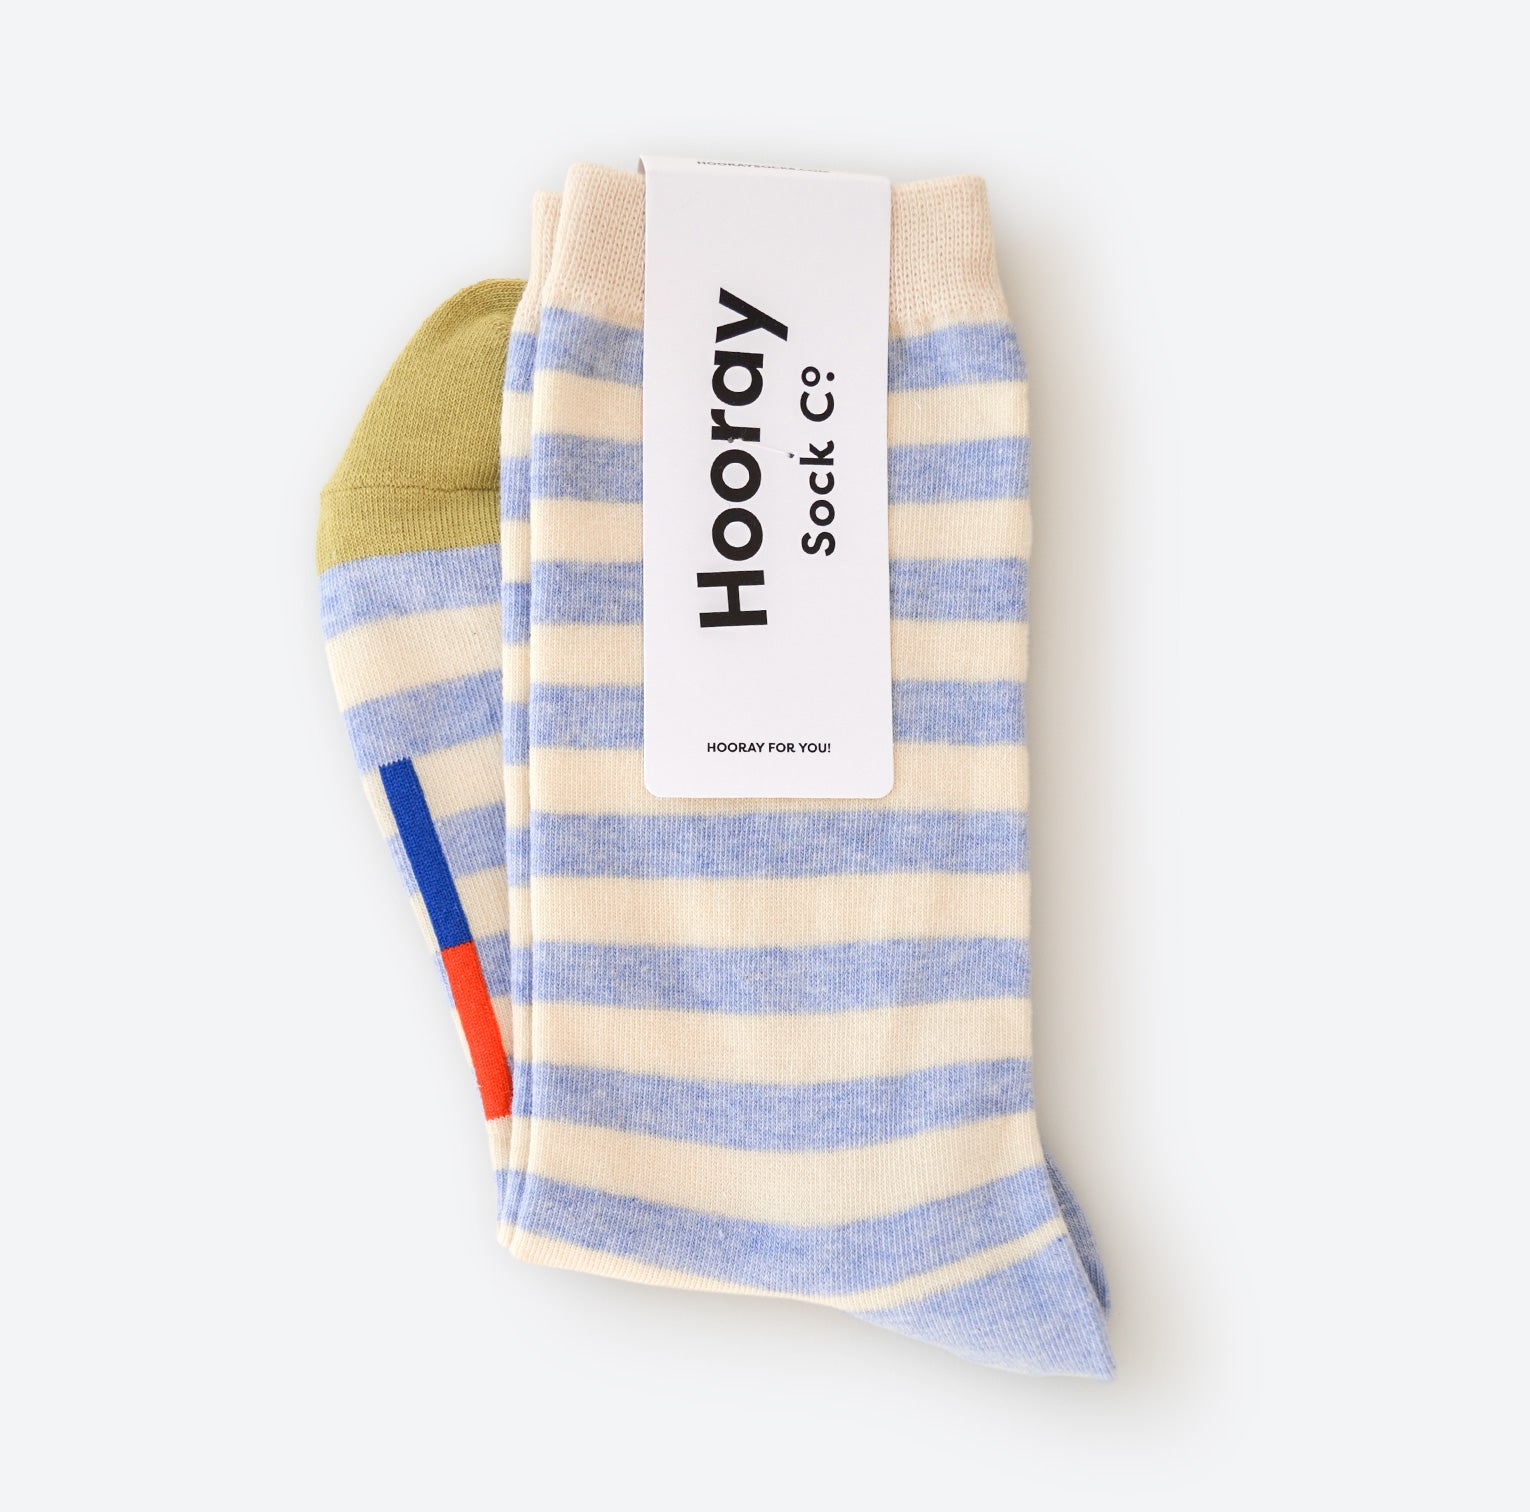 A delightful photograph showcasing our Greenwich Hooray Socks, a perfect blend of comfort and style. These crew socks feature a classic light blue and white stripe pattern with signature color bars. Crafted with 80% cotton and 20% spandex, they offer a lightweight and cozy feel. Made in South Korea, these unisex socks are available in two sizes: Large (Men&#39;s 8-12) and Small (Women&#39;s 4-10). Machine washable, no ironing needed; simply line dry for best results.